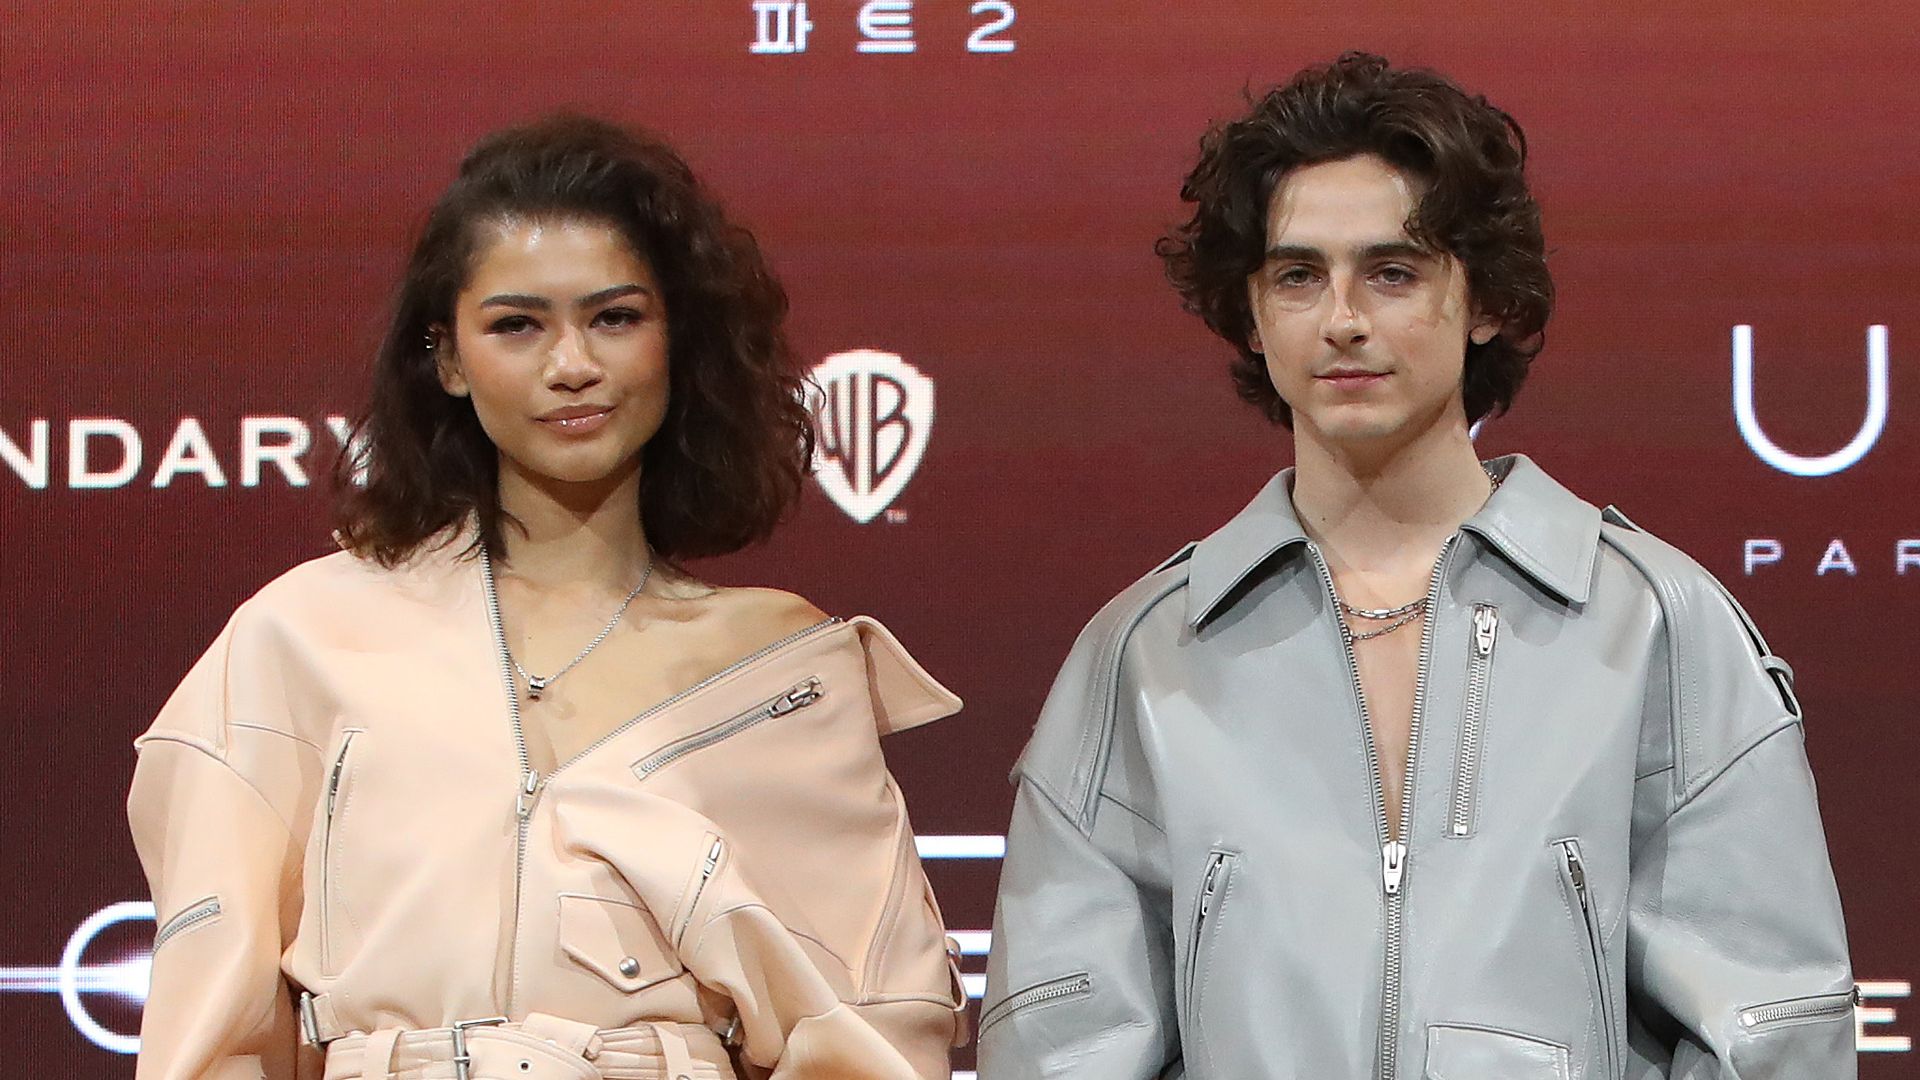 SEOUL, SOUTH KOREA - FEBRUARY 21: (L-R) Zendaya and Timothee Chalamet attend the press conference for "Dune: Part Two" on February 21, 2024 in Seoul, South Korea. (Photo by Chung Sung-Jun/Getty Images)